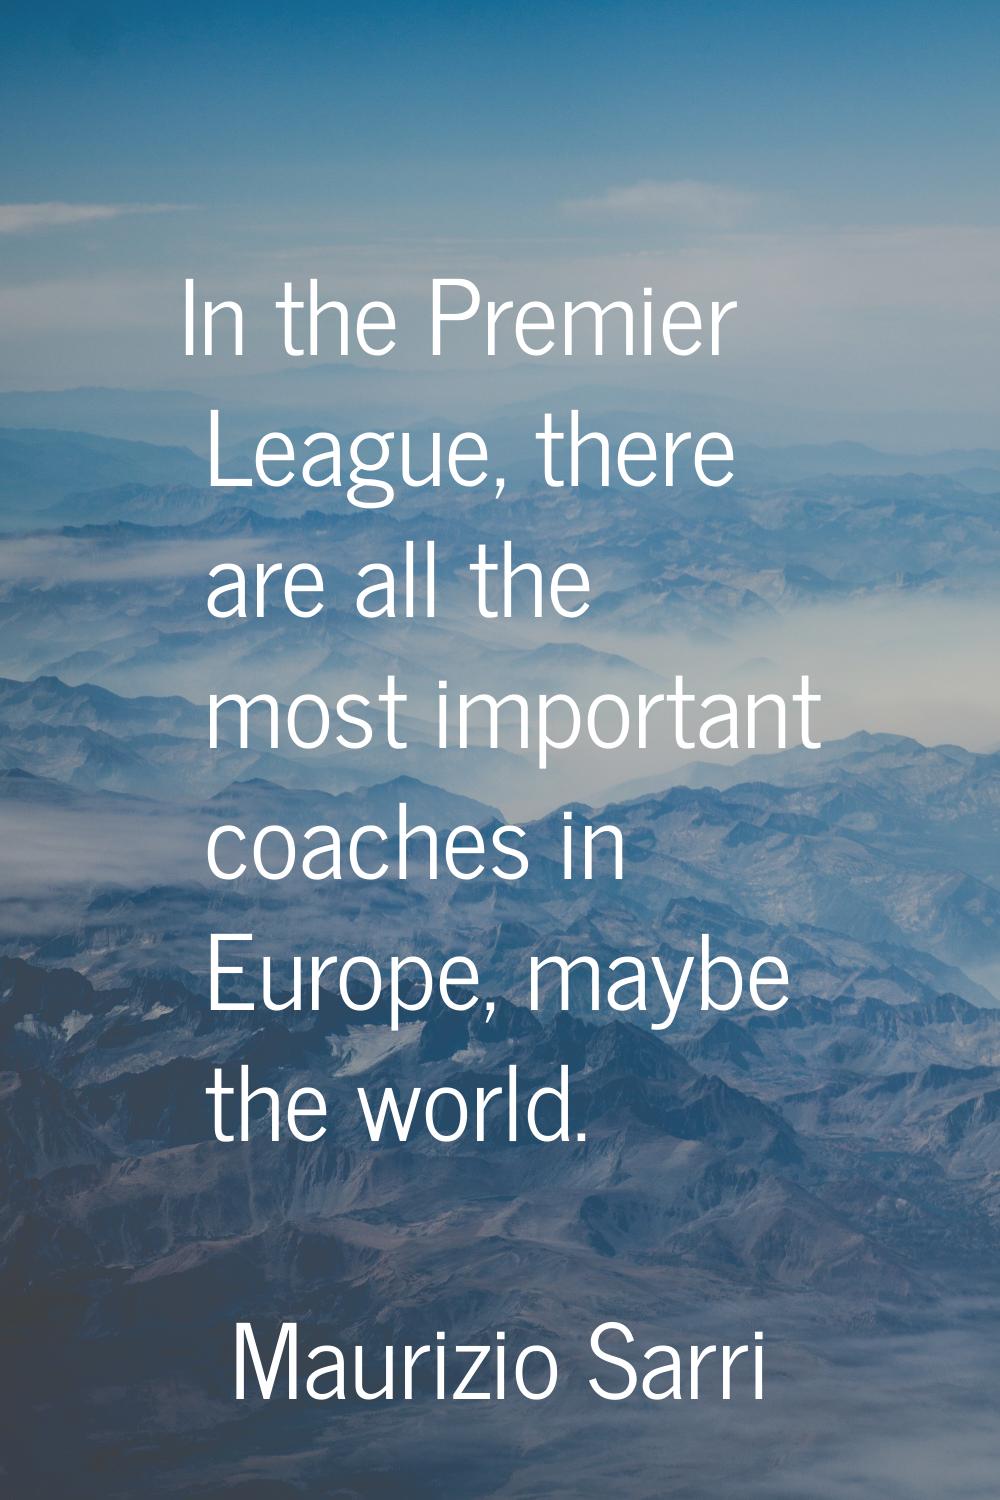 In the Premier League, there are all the most important coaches in Europe, maybe the world.